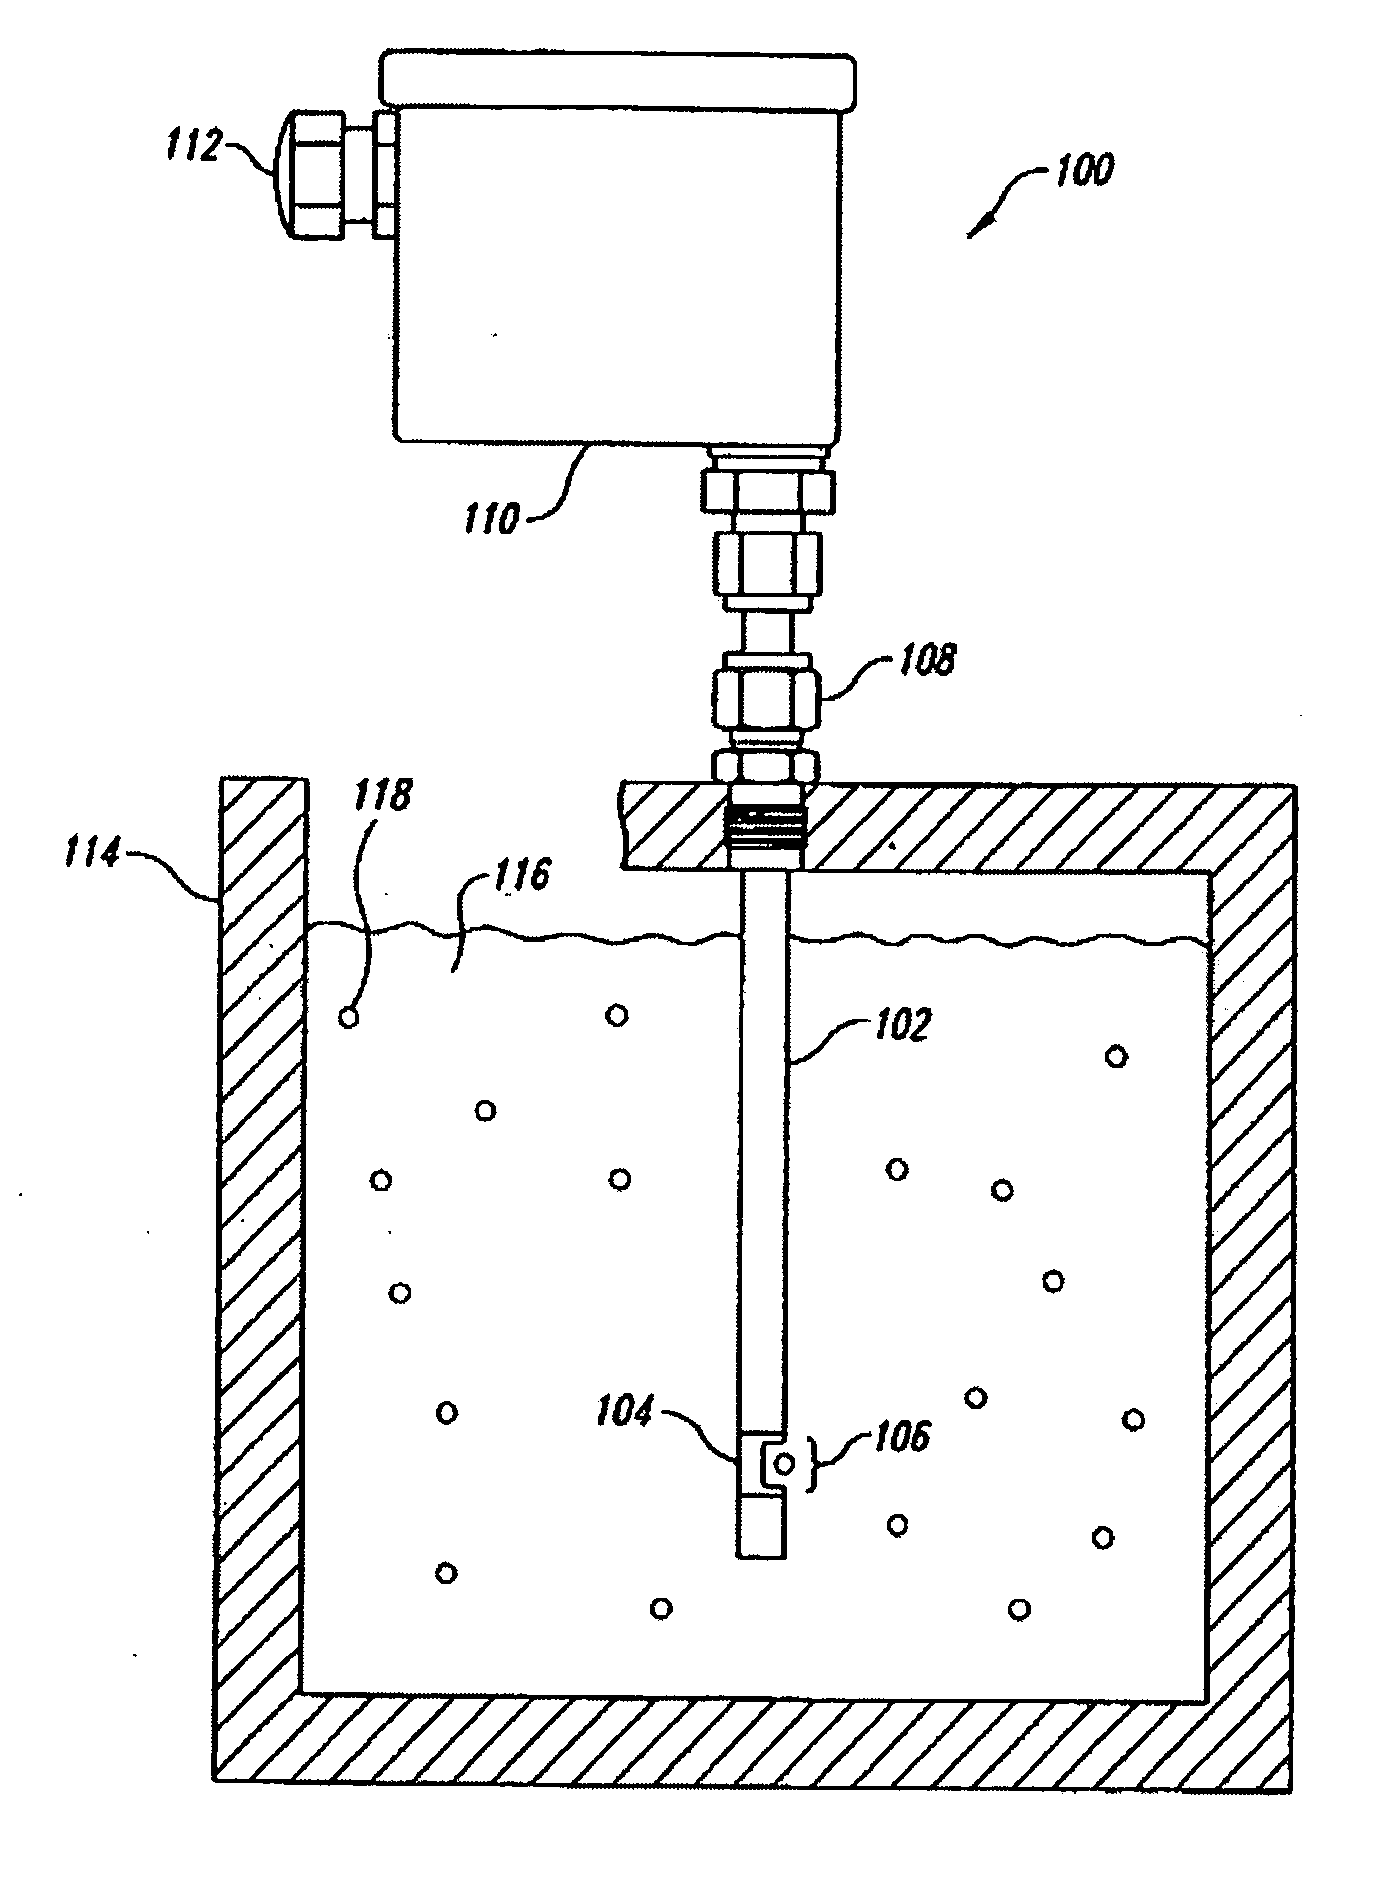 Systems and methods for in situ spectroscopic measurements